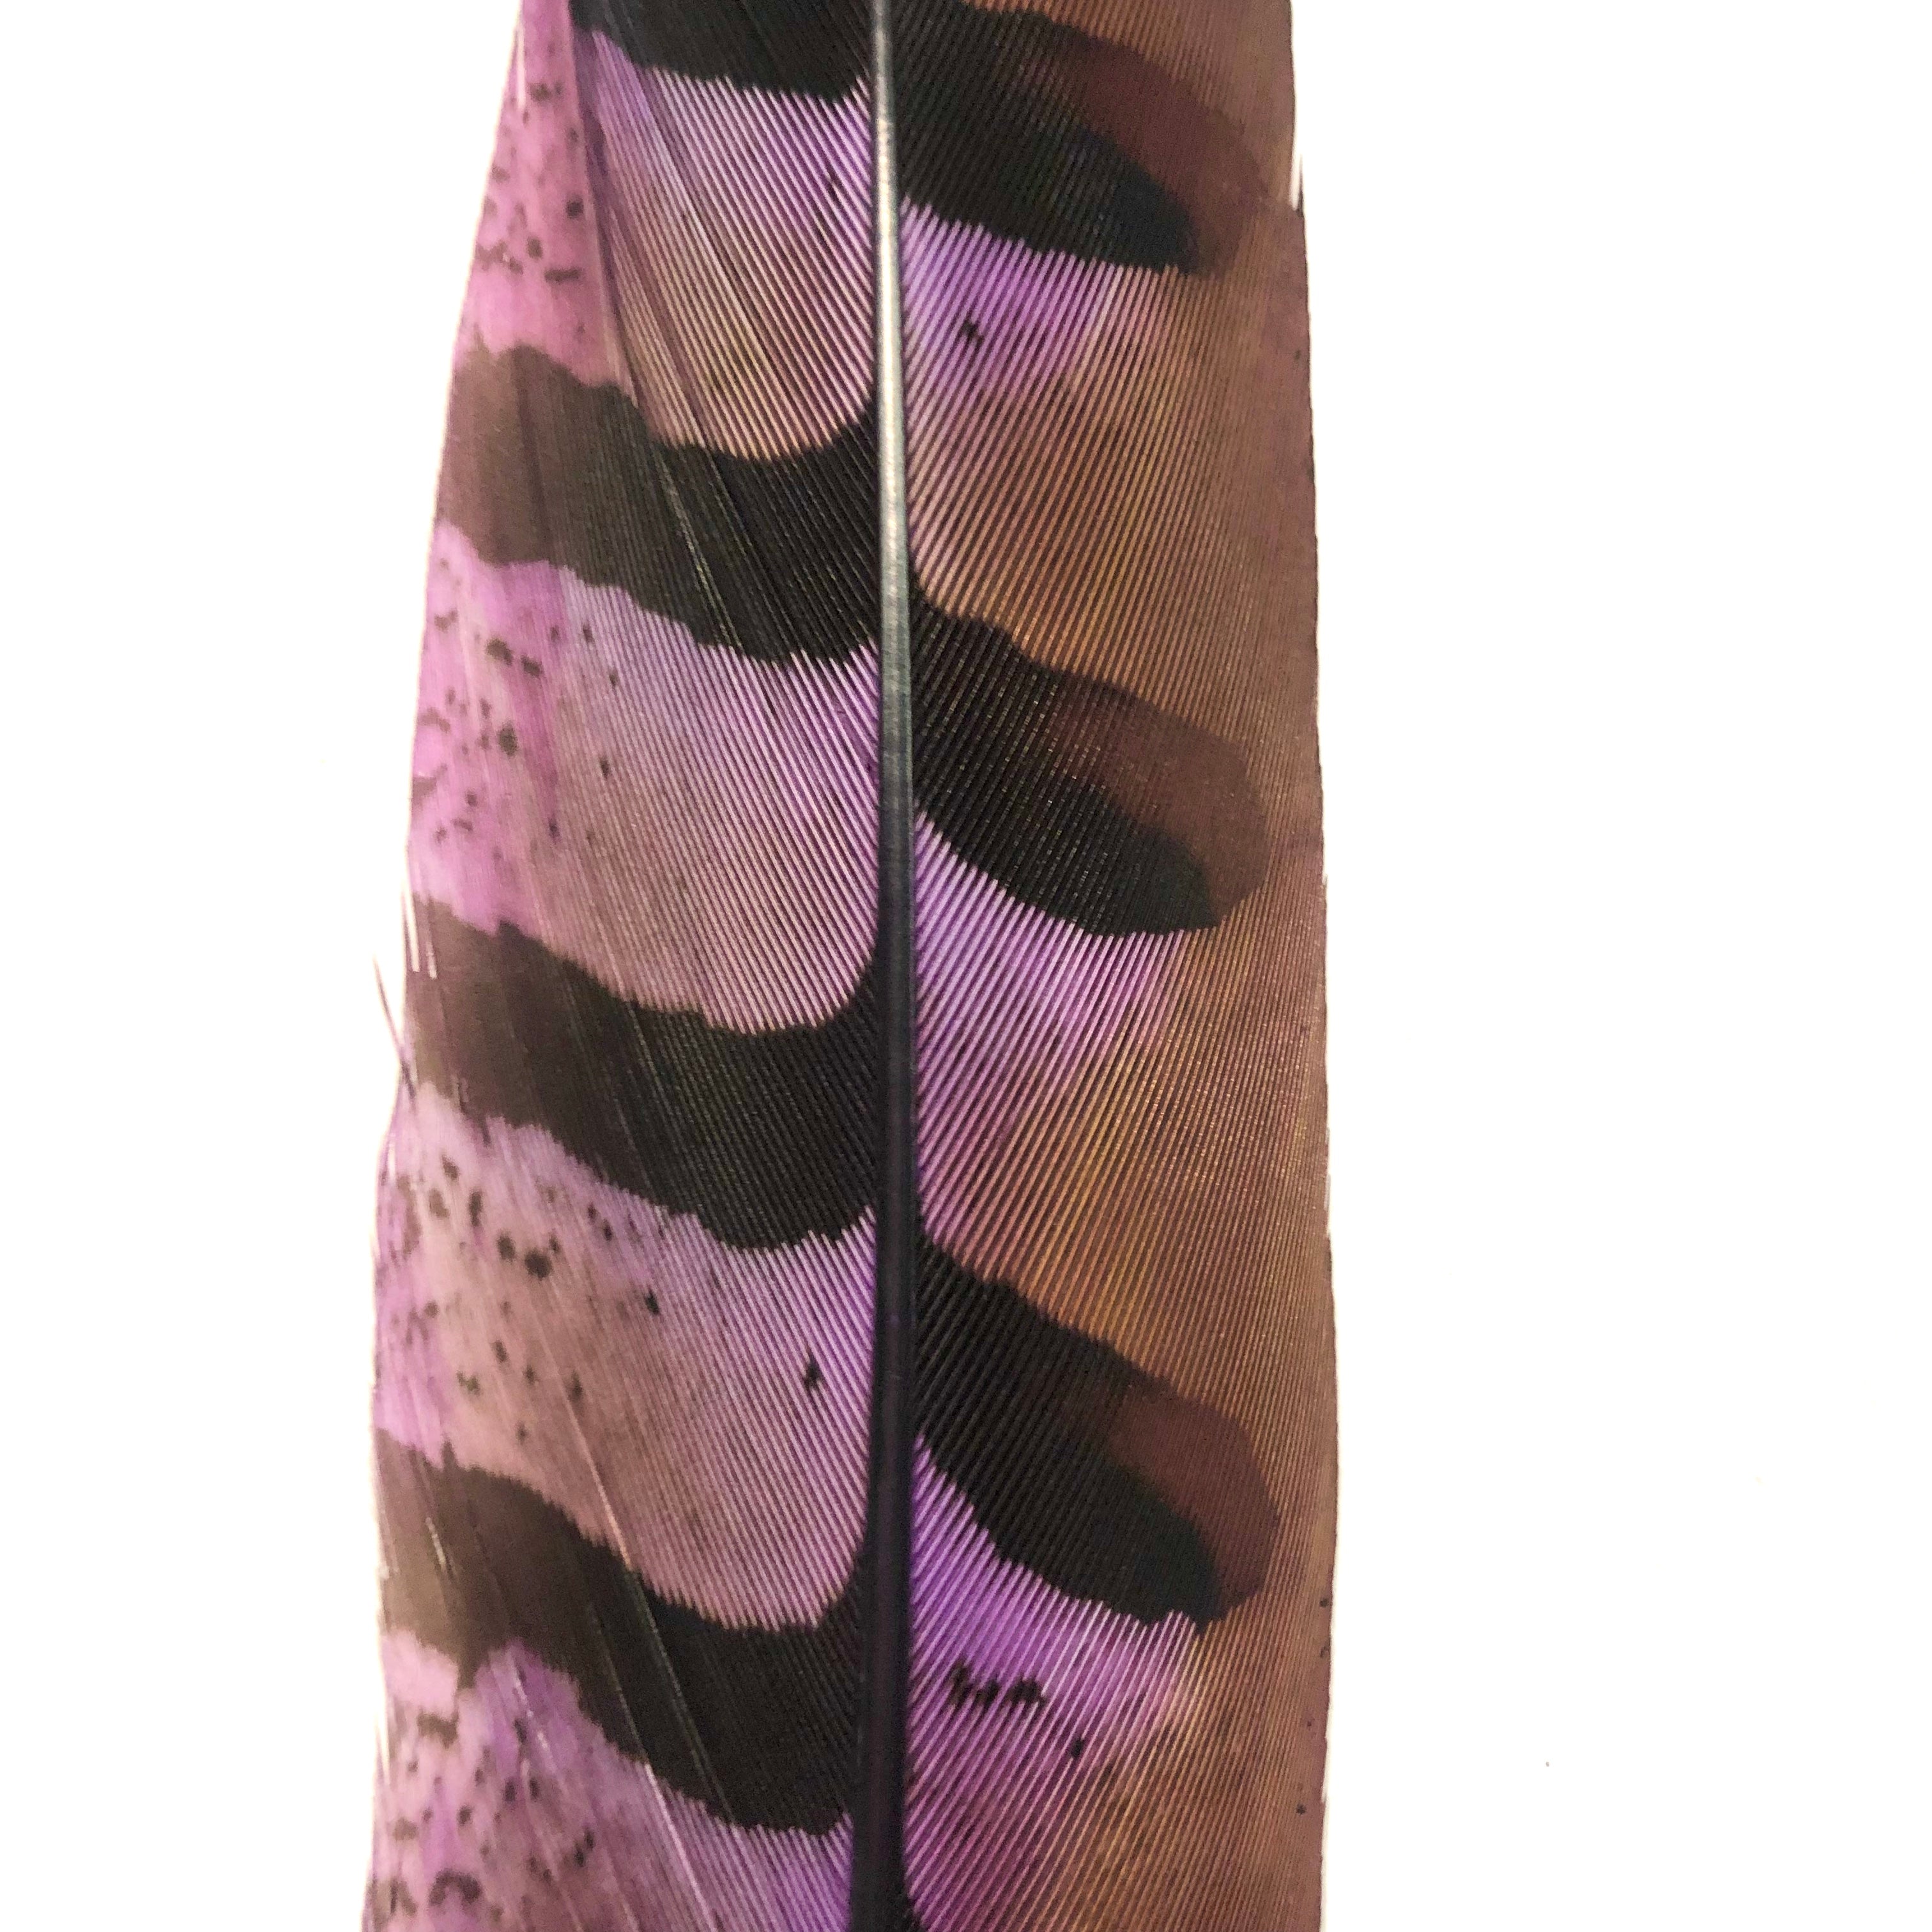 12" to 14" Reeves Pheasant Tail Feather - Purple